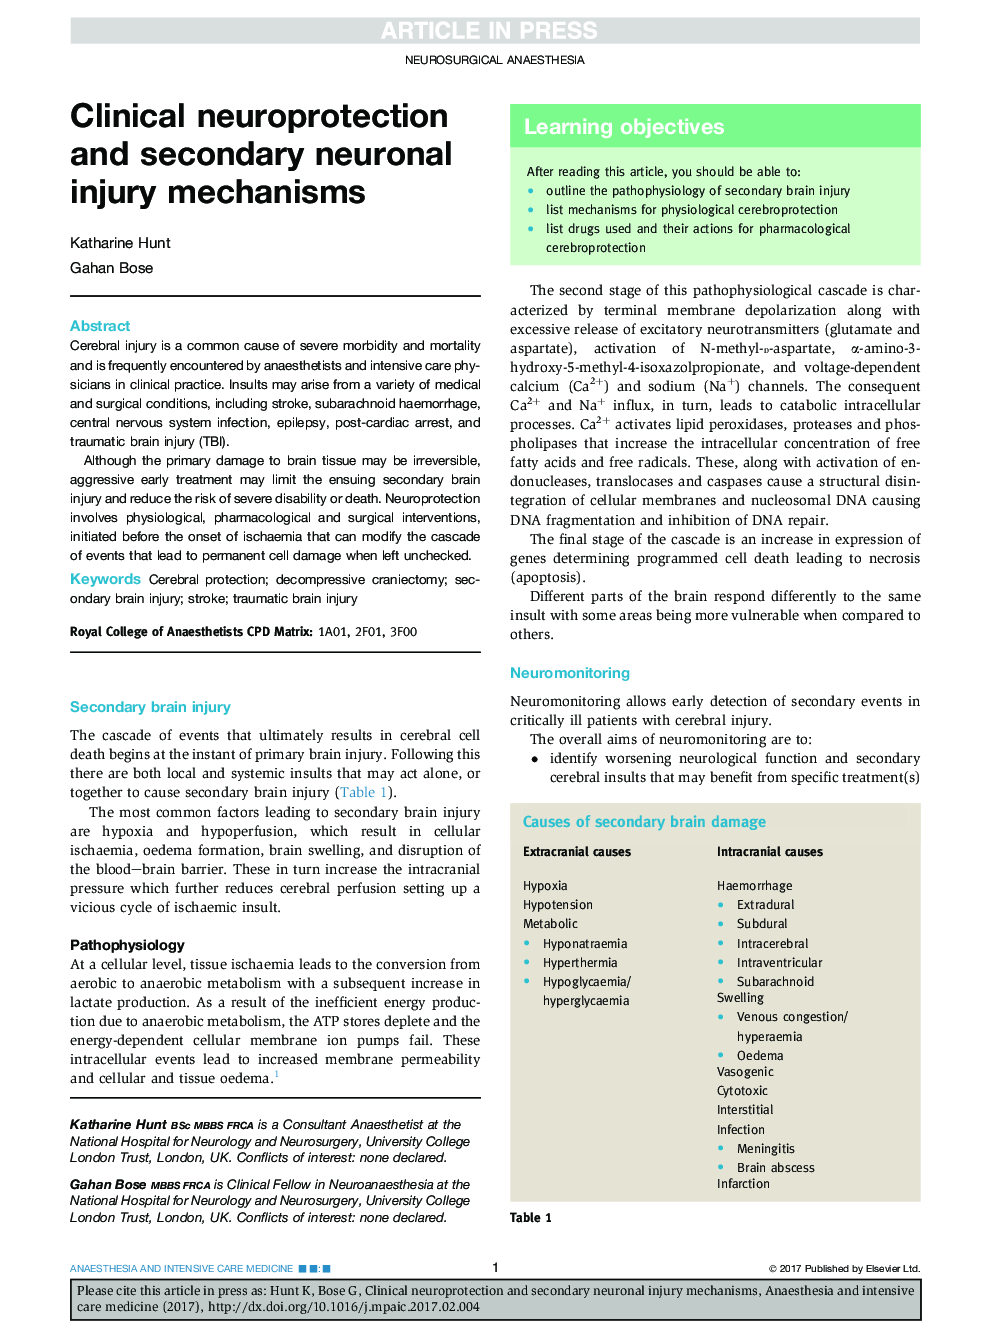 Clinical neuroprotection and secondary neuronal injury mechanisms